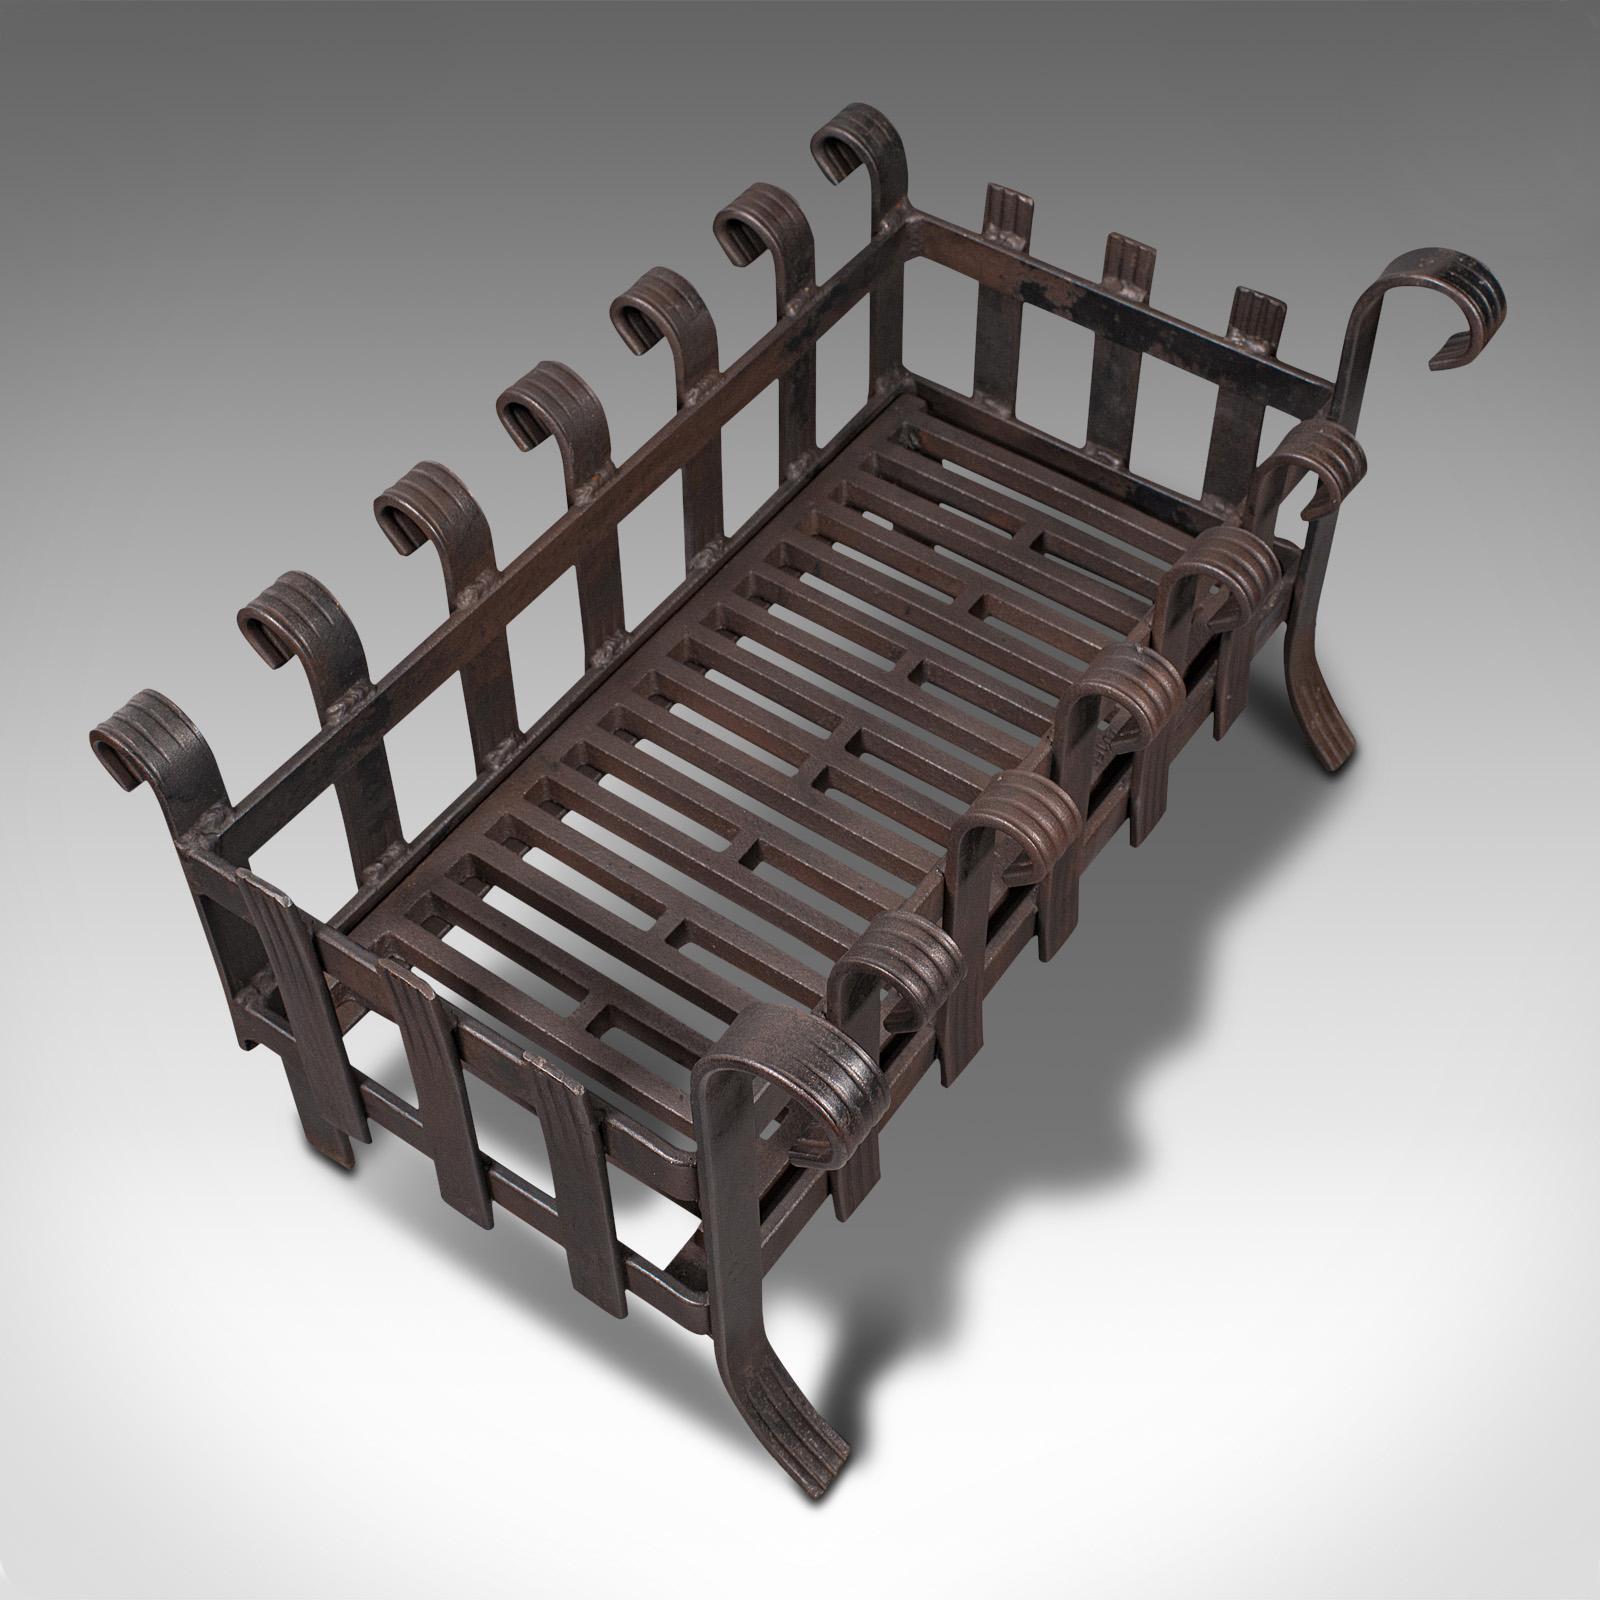 Vintage Fire Basket, English, Iron, Fireplace, Gothic Revival, Mid Century, 1950 For Sale 1